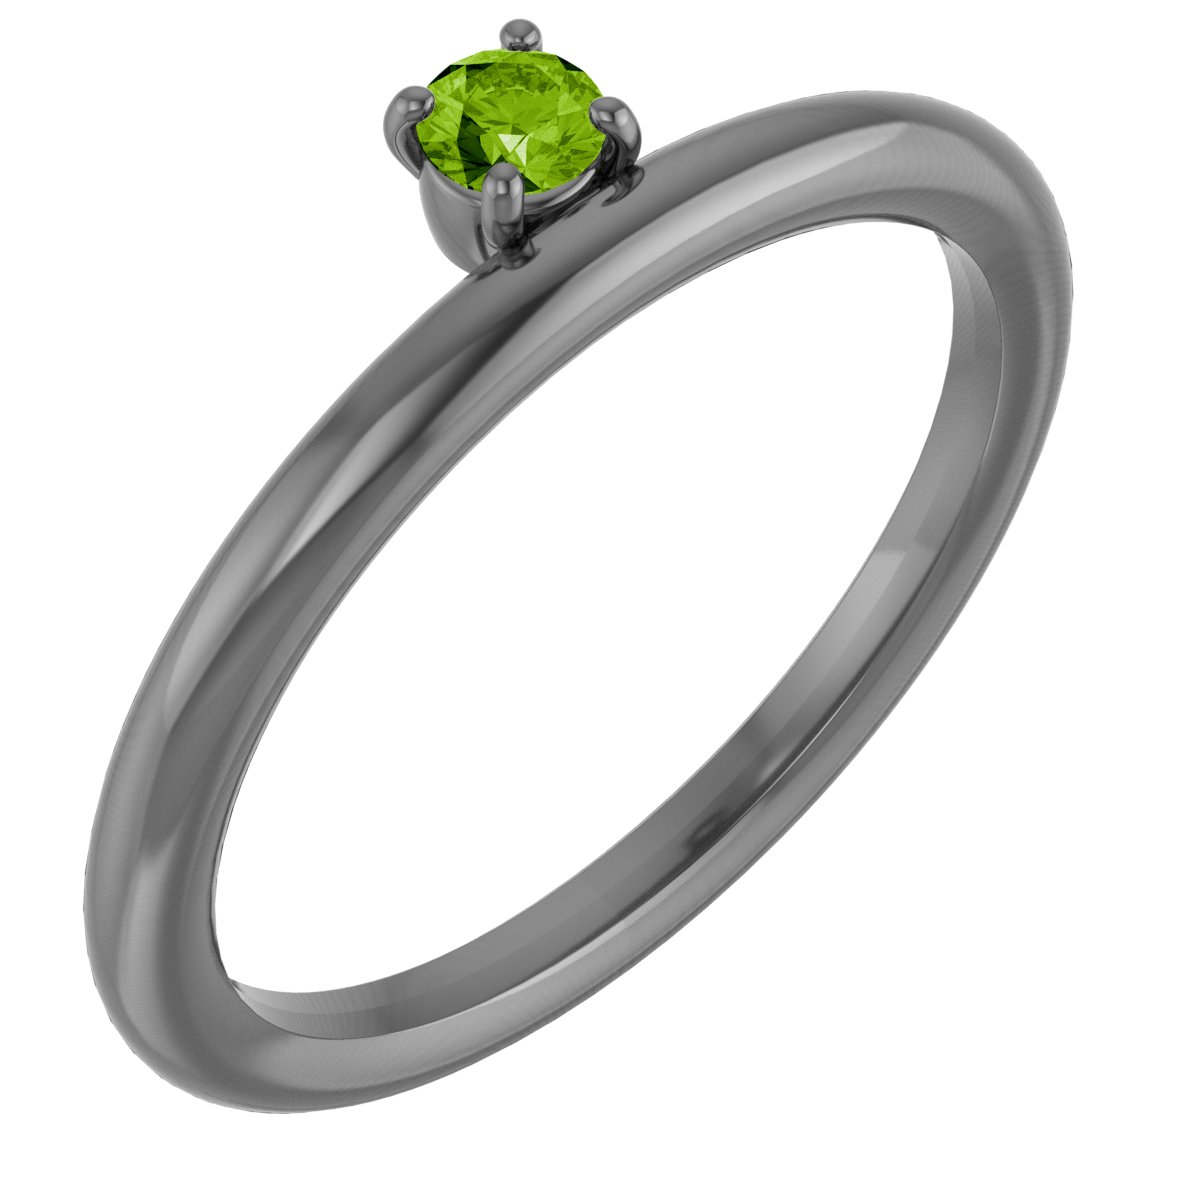 14K Yellow Peridot Stackable Ring Ref. 13079488